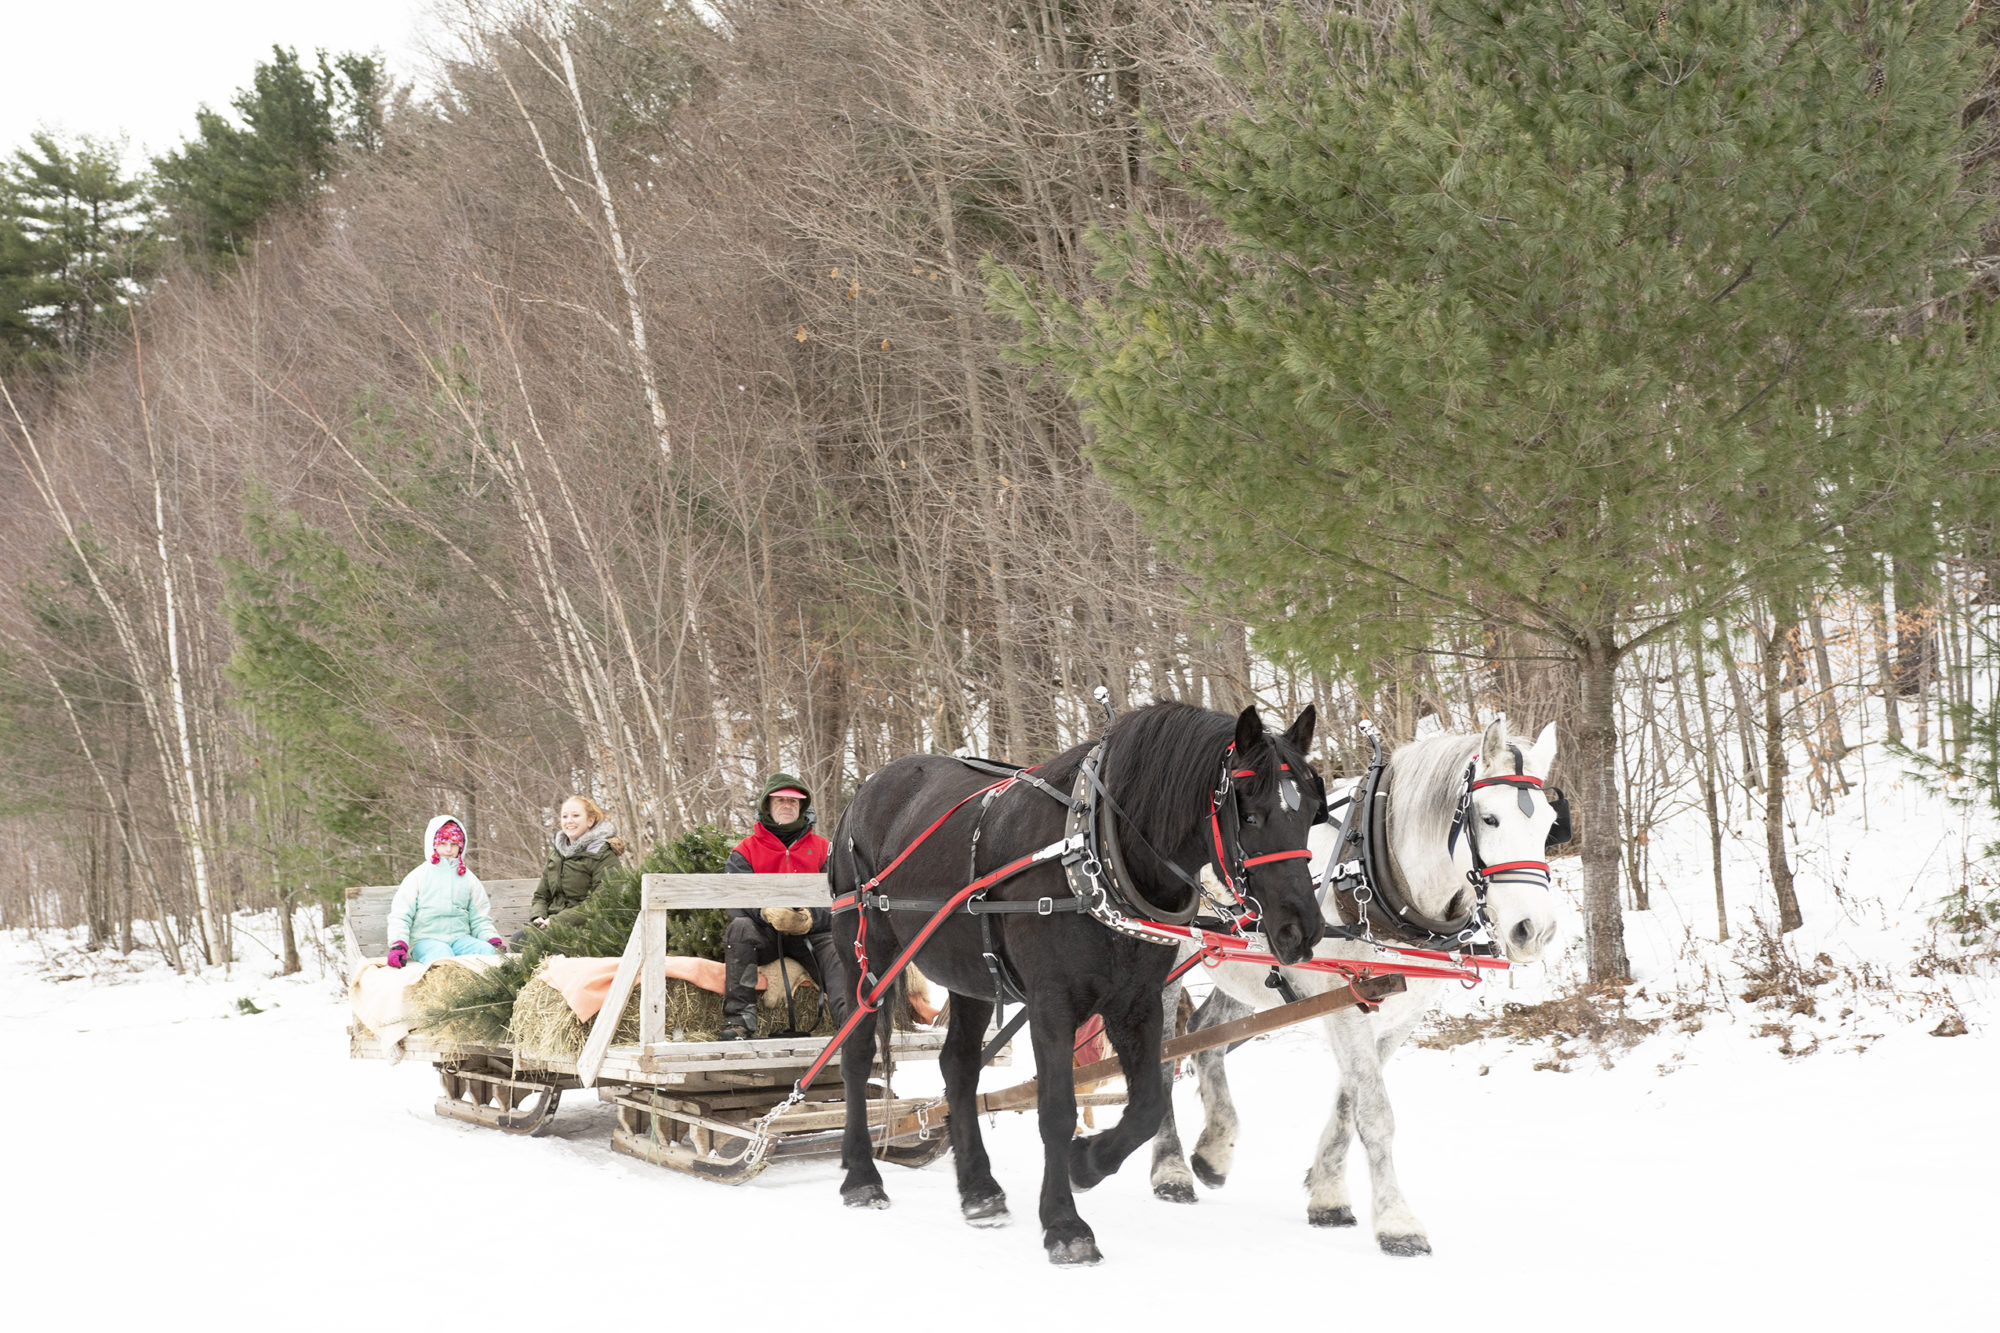 David Russell, owner of Russell Christmas Tree Farm in Starksboro, gives visitors a ride on a horse-drawn sleigh. The farm sells between 1,000 and 1,500 Christmas trees every year, all of them grown on Russell’s 360-acre farm.